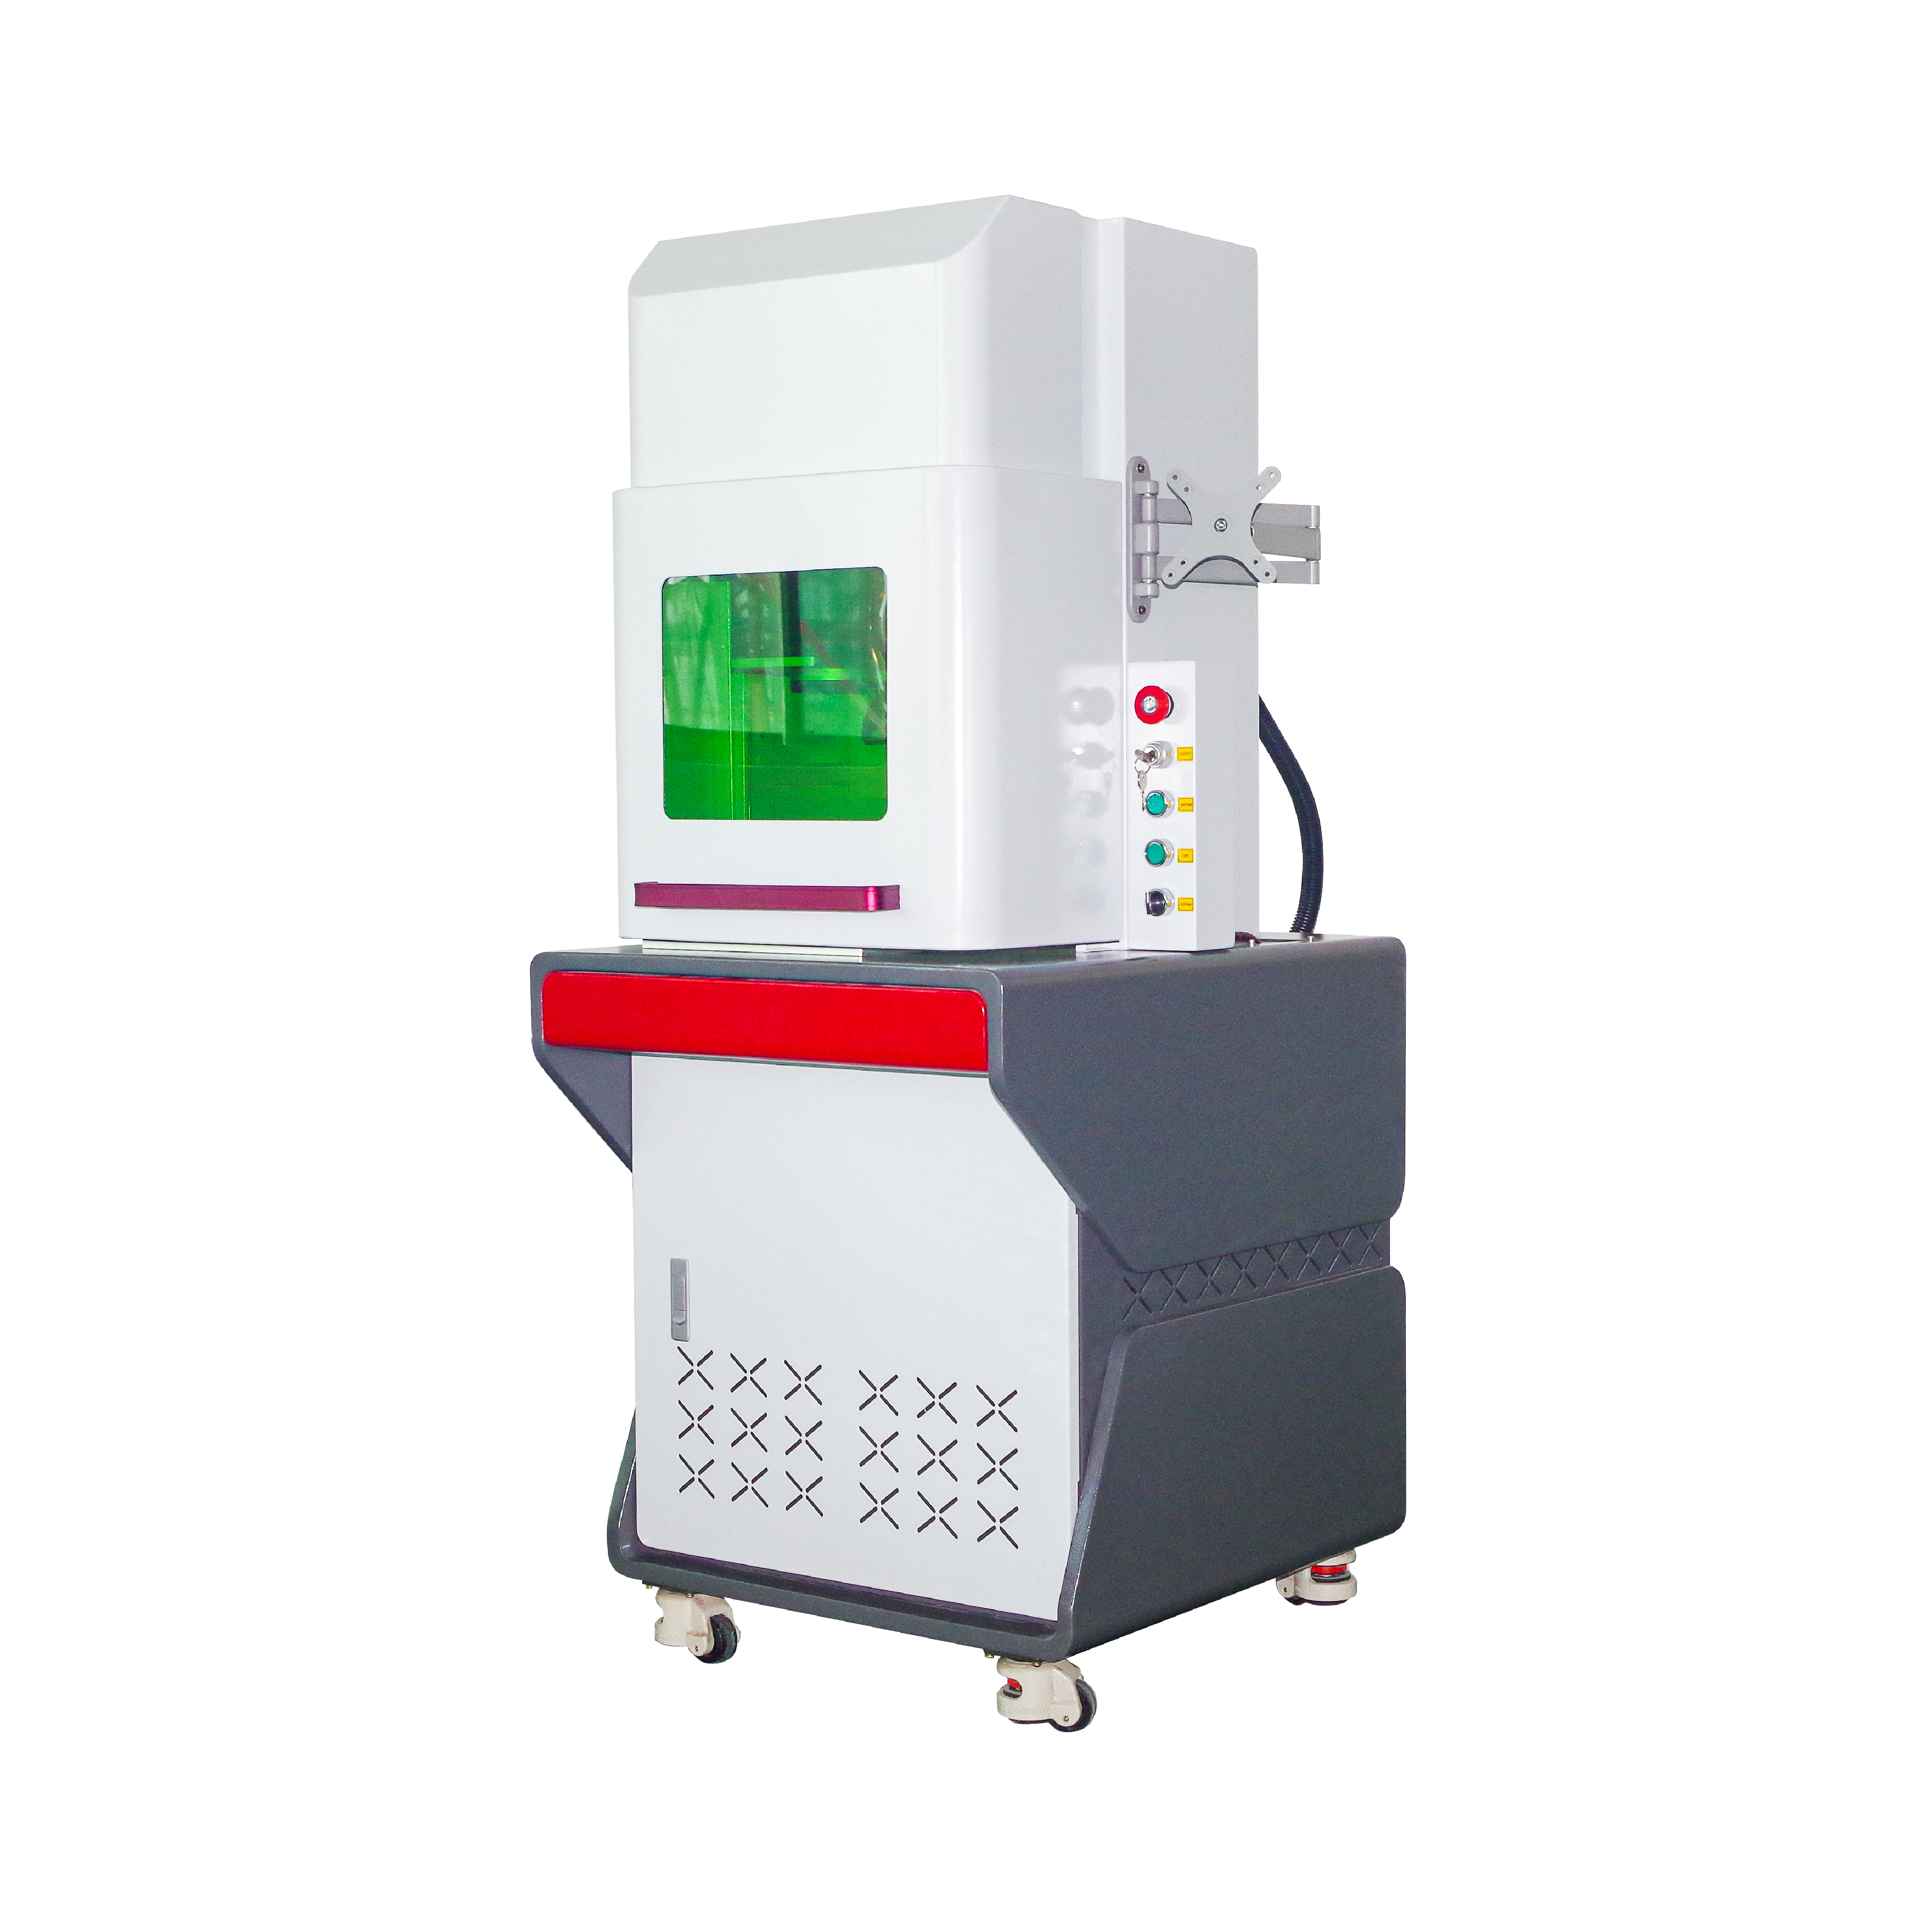 Enclosed 30W 35W 60W Metal Tube CO2 Laser Engraving Marking Machine DAVI Laser Marker for Plastic Acrylic Paper Leather Wooden Product